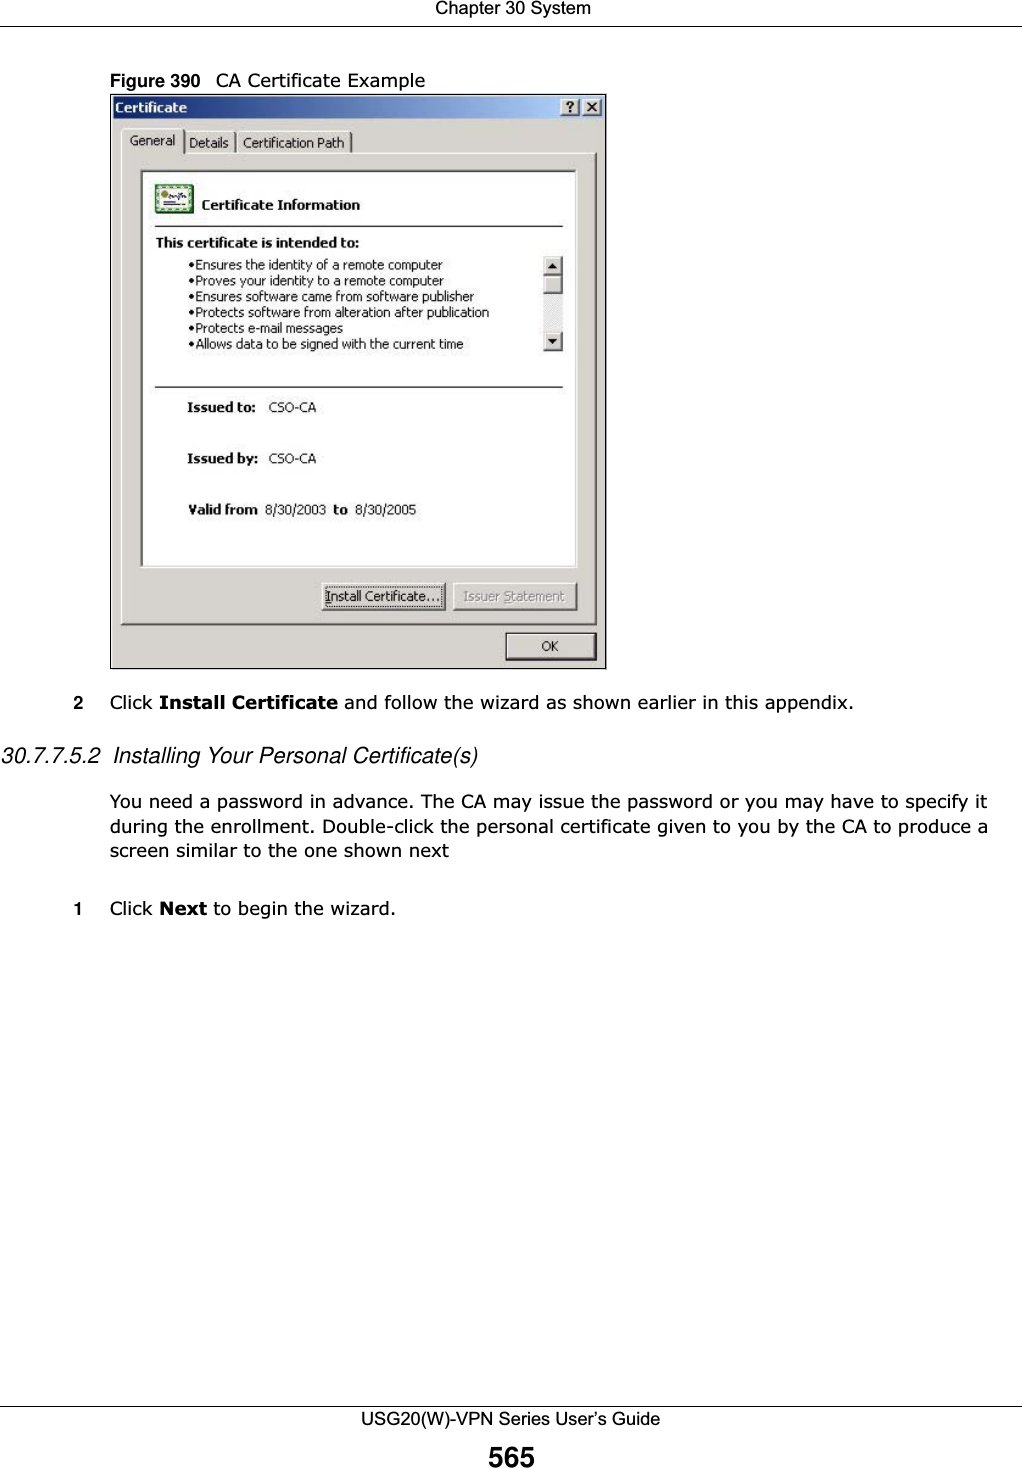  Chapter 30 SystemUSG20(W)-VPN Series User’s Guide565Figure 390   CA Certificate Example2Click Install Certificate and follow the wizard as shown earlier in this appendix.30.7.7.5.2  Installing Your Personal Certificate(s)You need a password in advance. The CA may issue the password or you may have to specify it during the enrollment. Double-click the personal certificate given to you by the CA to produce a screen similar to the one shown next1Click Next to begin the wizard.